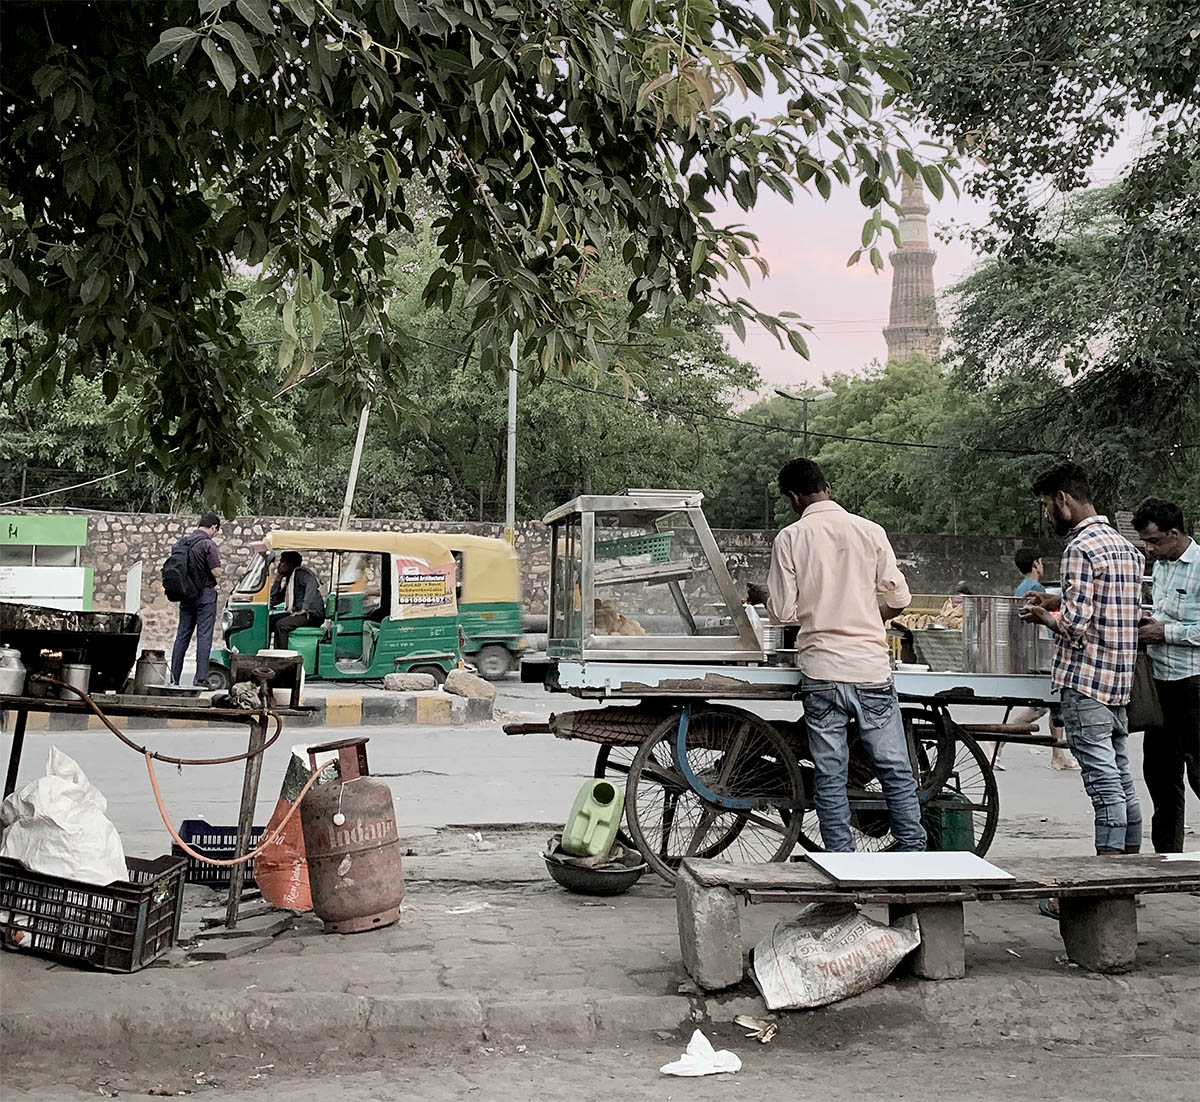 Roadside food kiosk with the Qutub Minar in the background